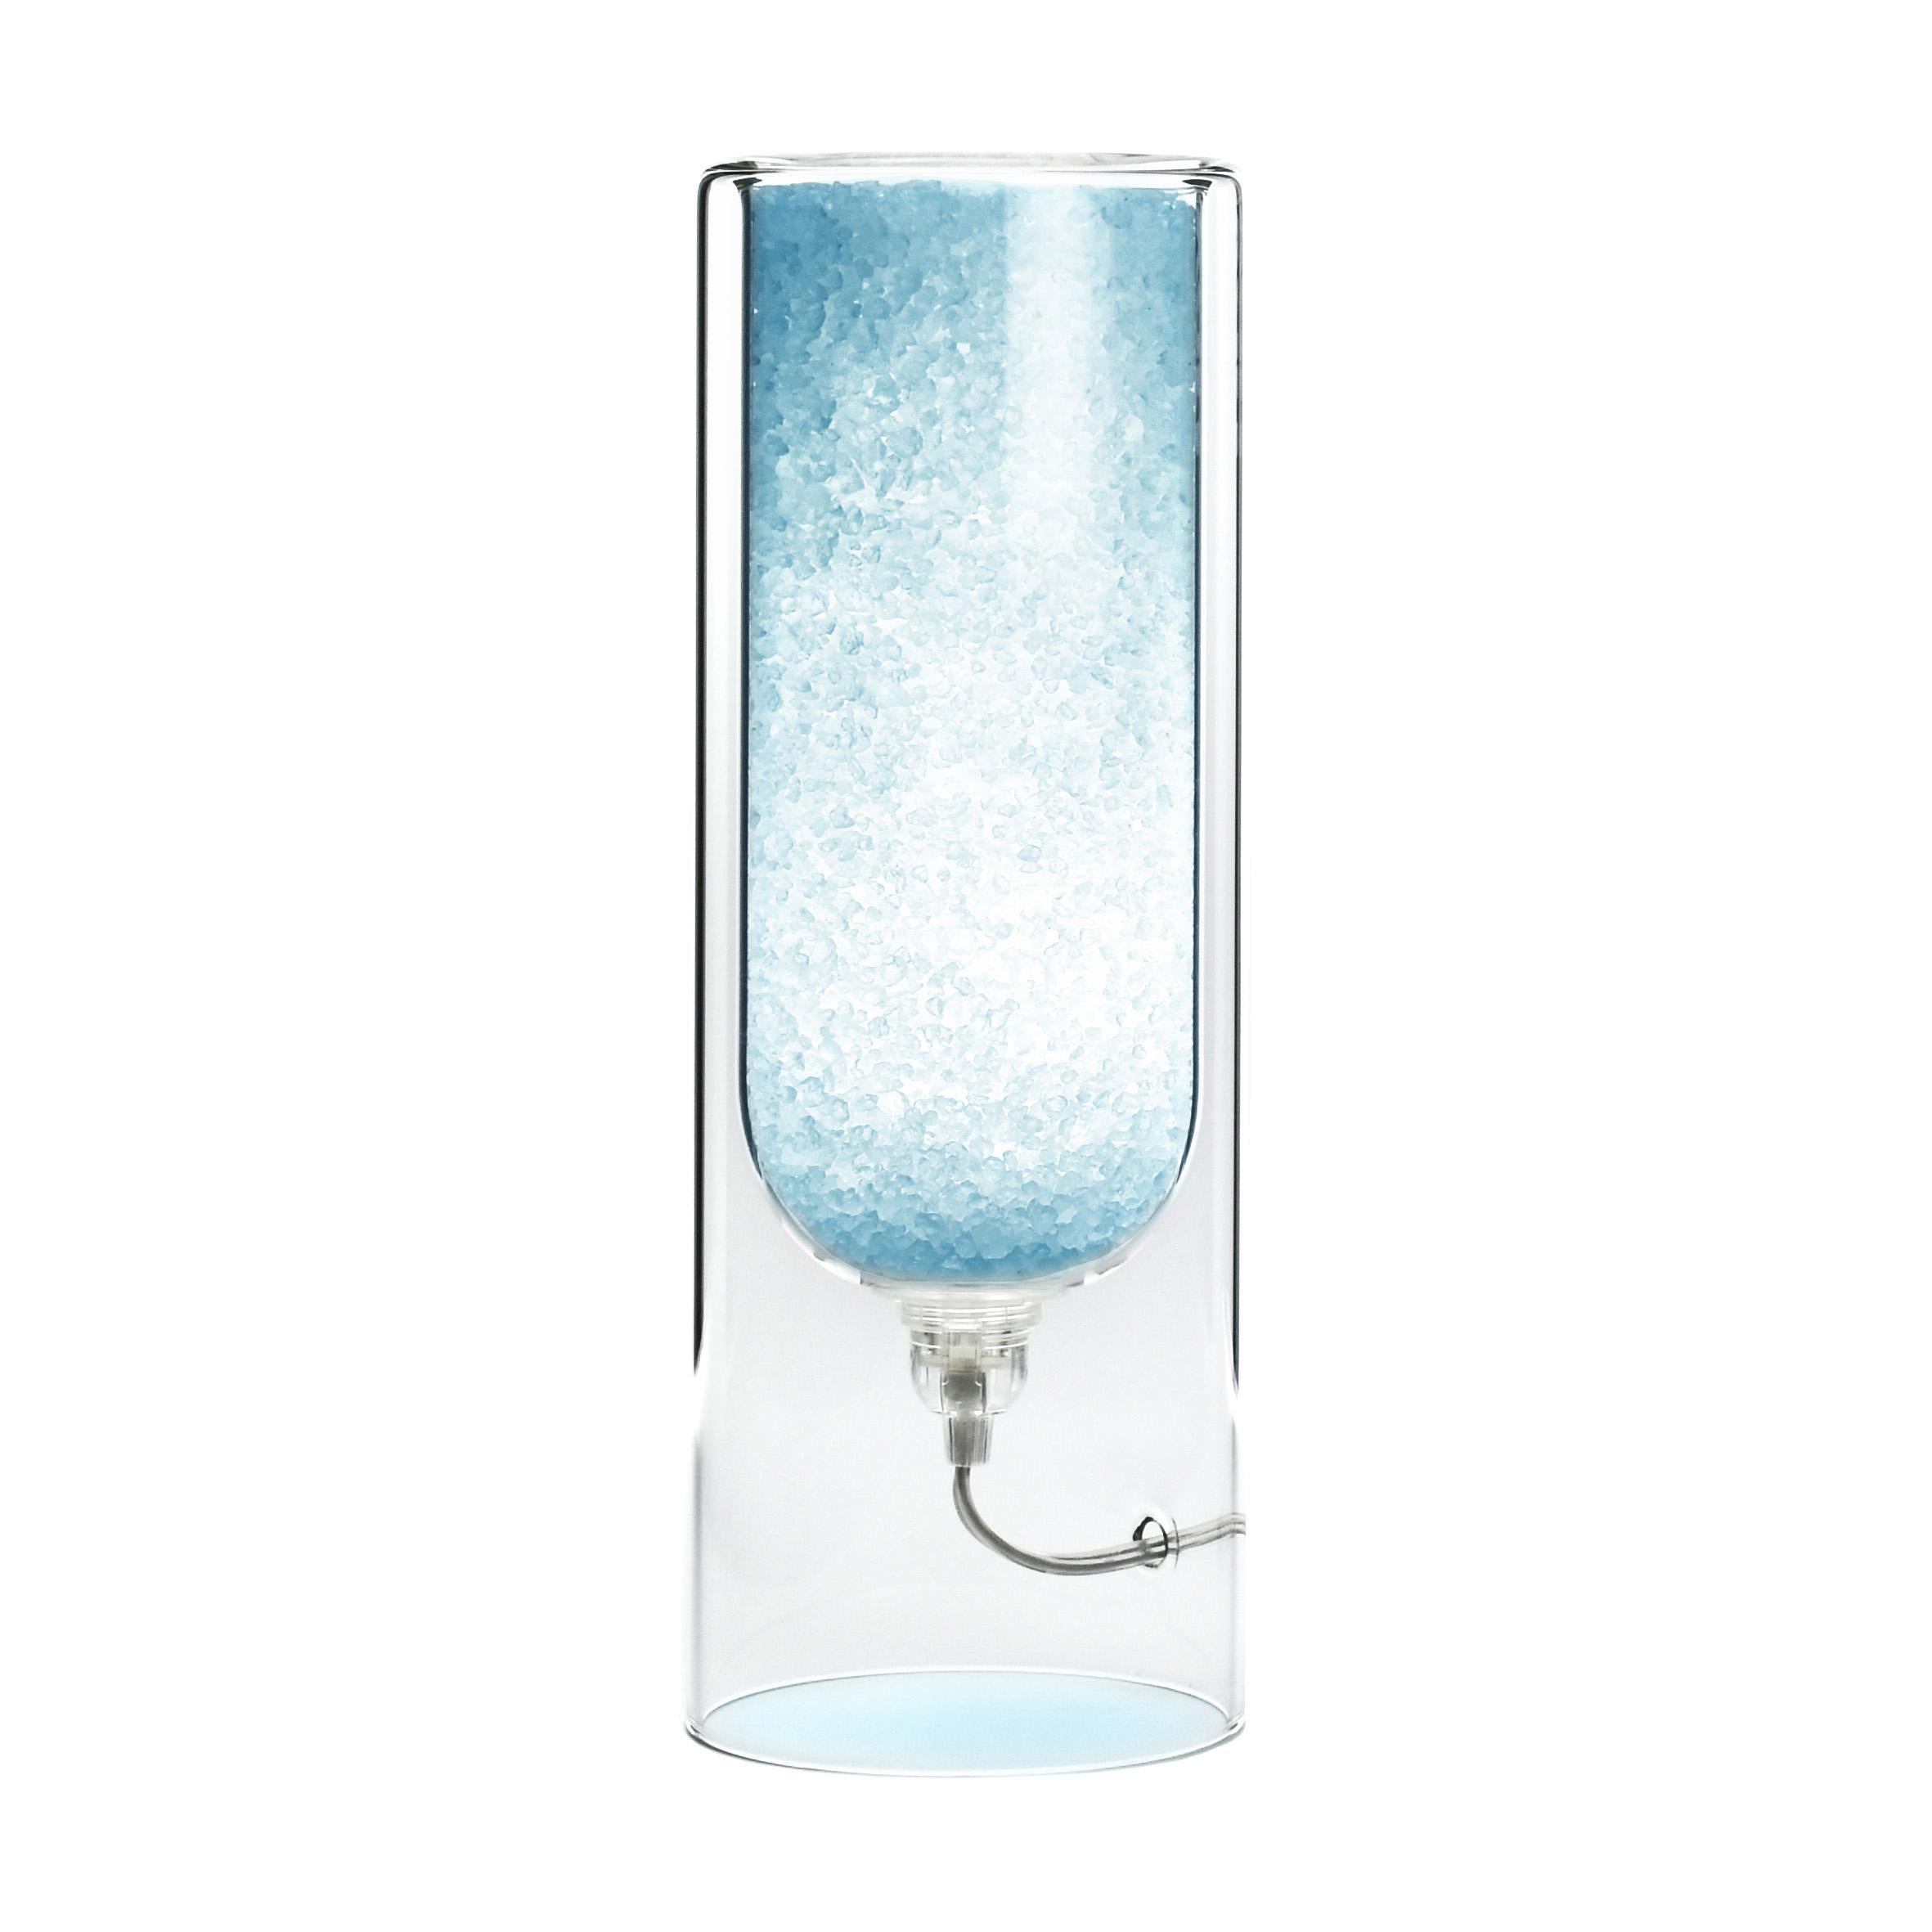 Light Blue Rocklumìna XXS table lamp by Coki Barbieri.
Dimensions: W 12 x D 12 x H 33.5 cm.
Materials: Italian rock salt crystals colored with natural pigments, mineral pigments from Italian soil and borosilicate glass.

All our lamps can be